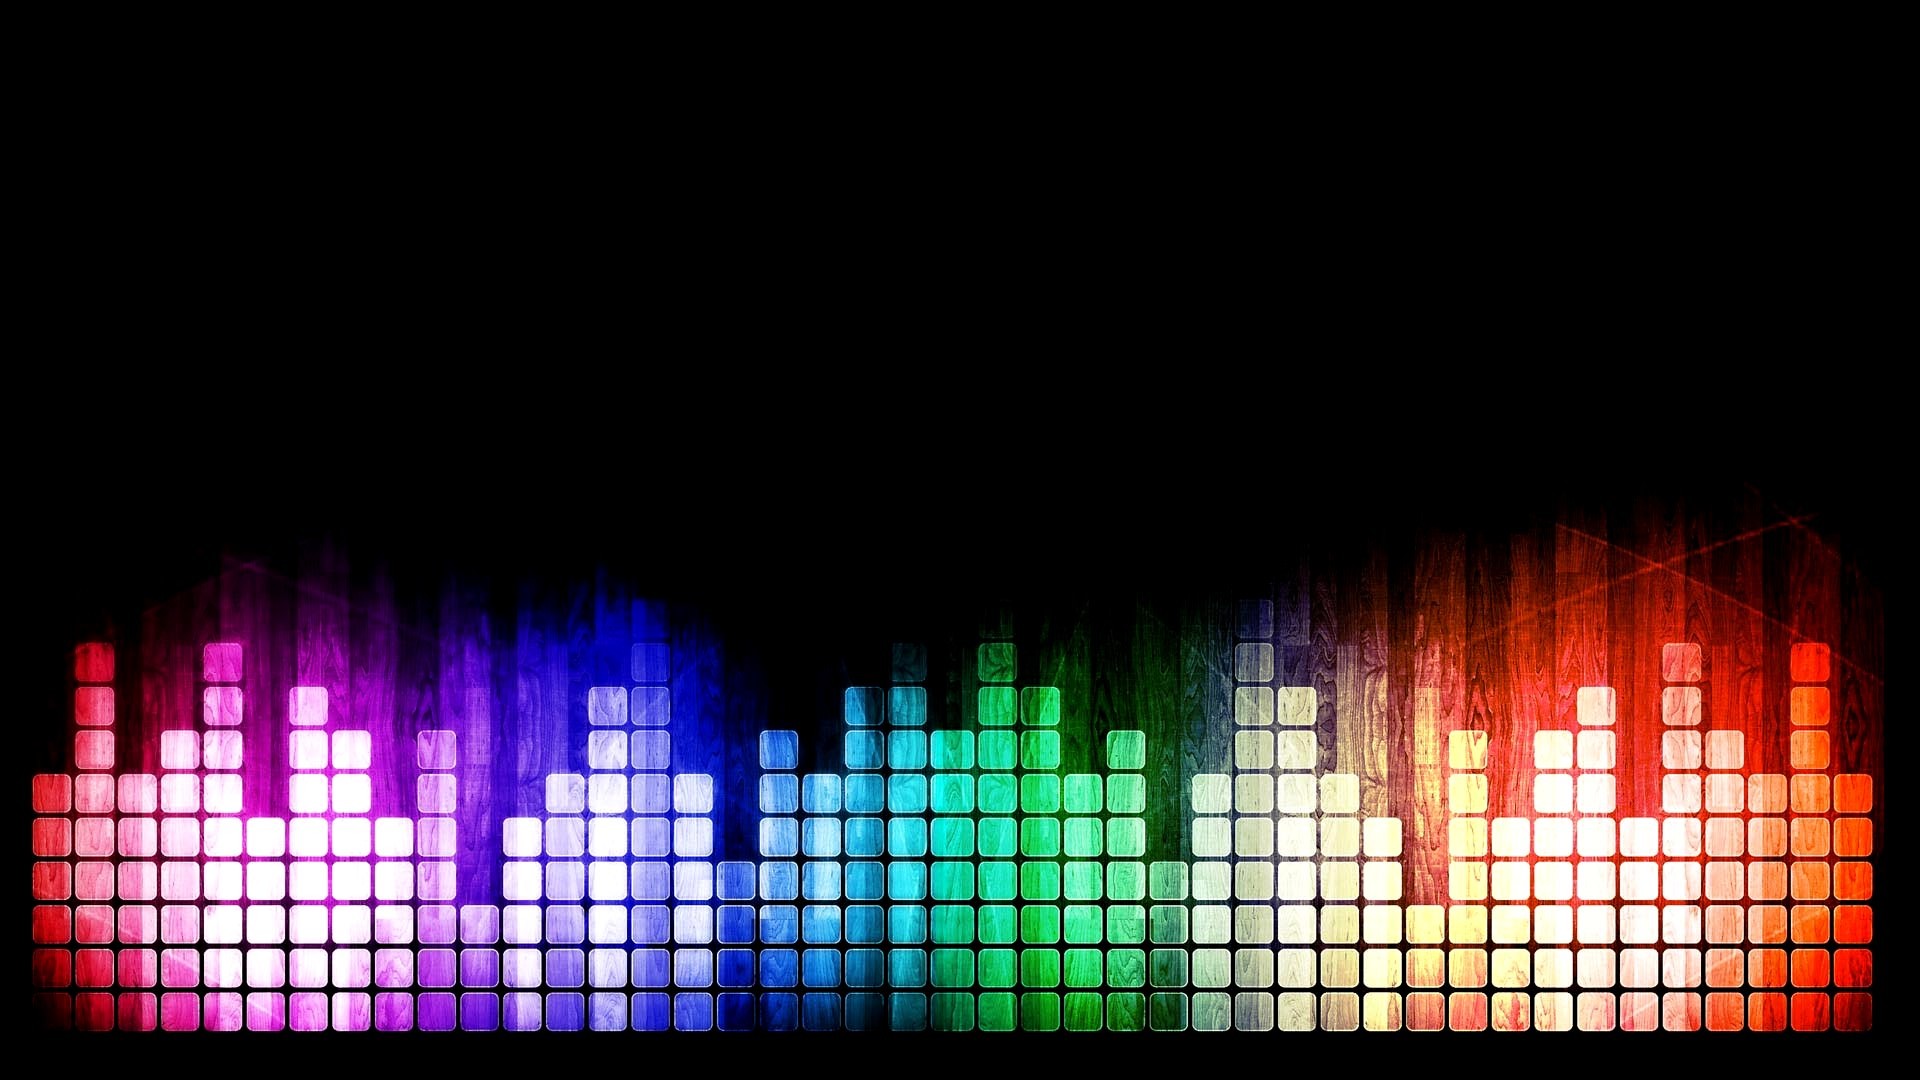 1920x1080 Music Is My Life HD Wallpaper in Full HD from the Abstract category.